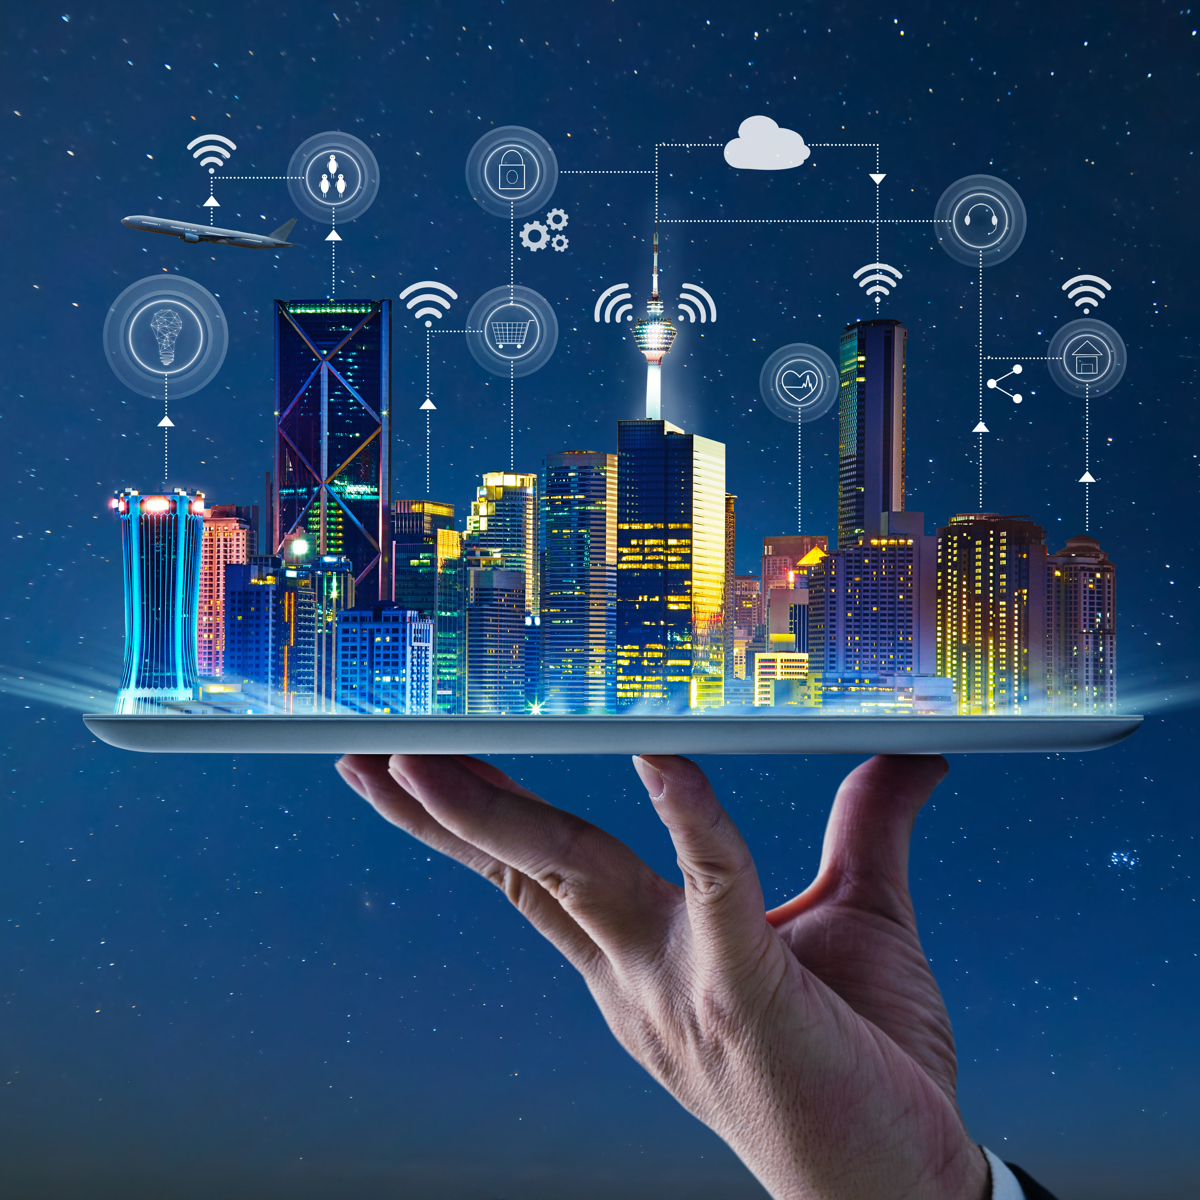 The benefits of IoT in smart cities are illustrated with a city sitting on top of a tablet.